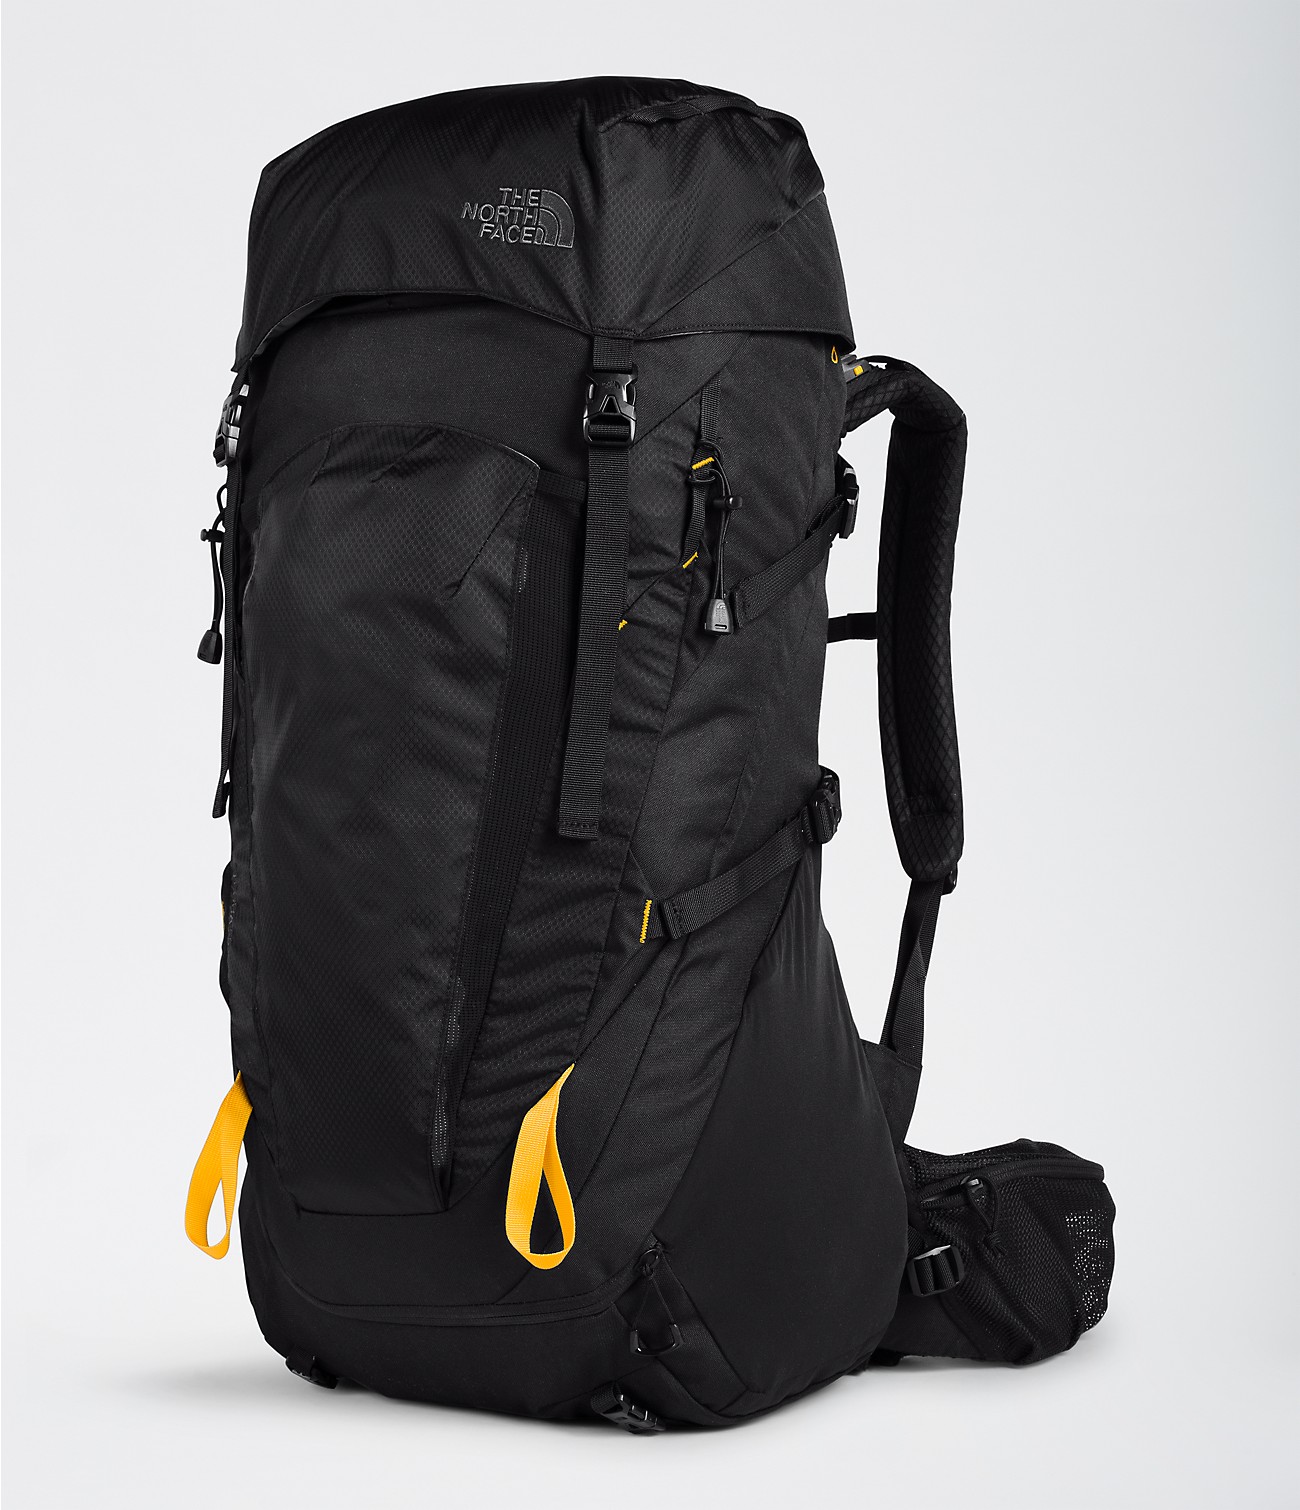 Unlock Wilderness' choice in the Deuter Vs North Face comparison, the Terra 55 Backpack by The North Face